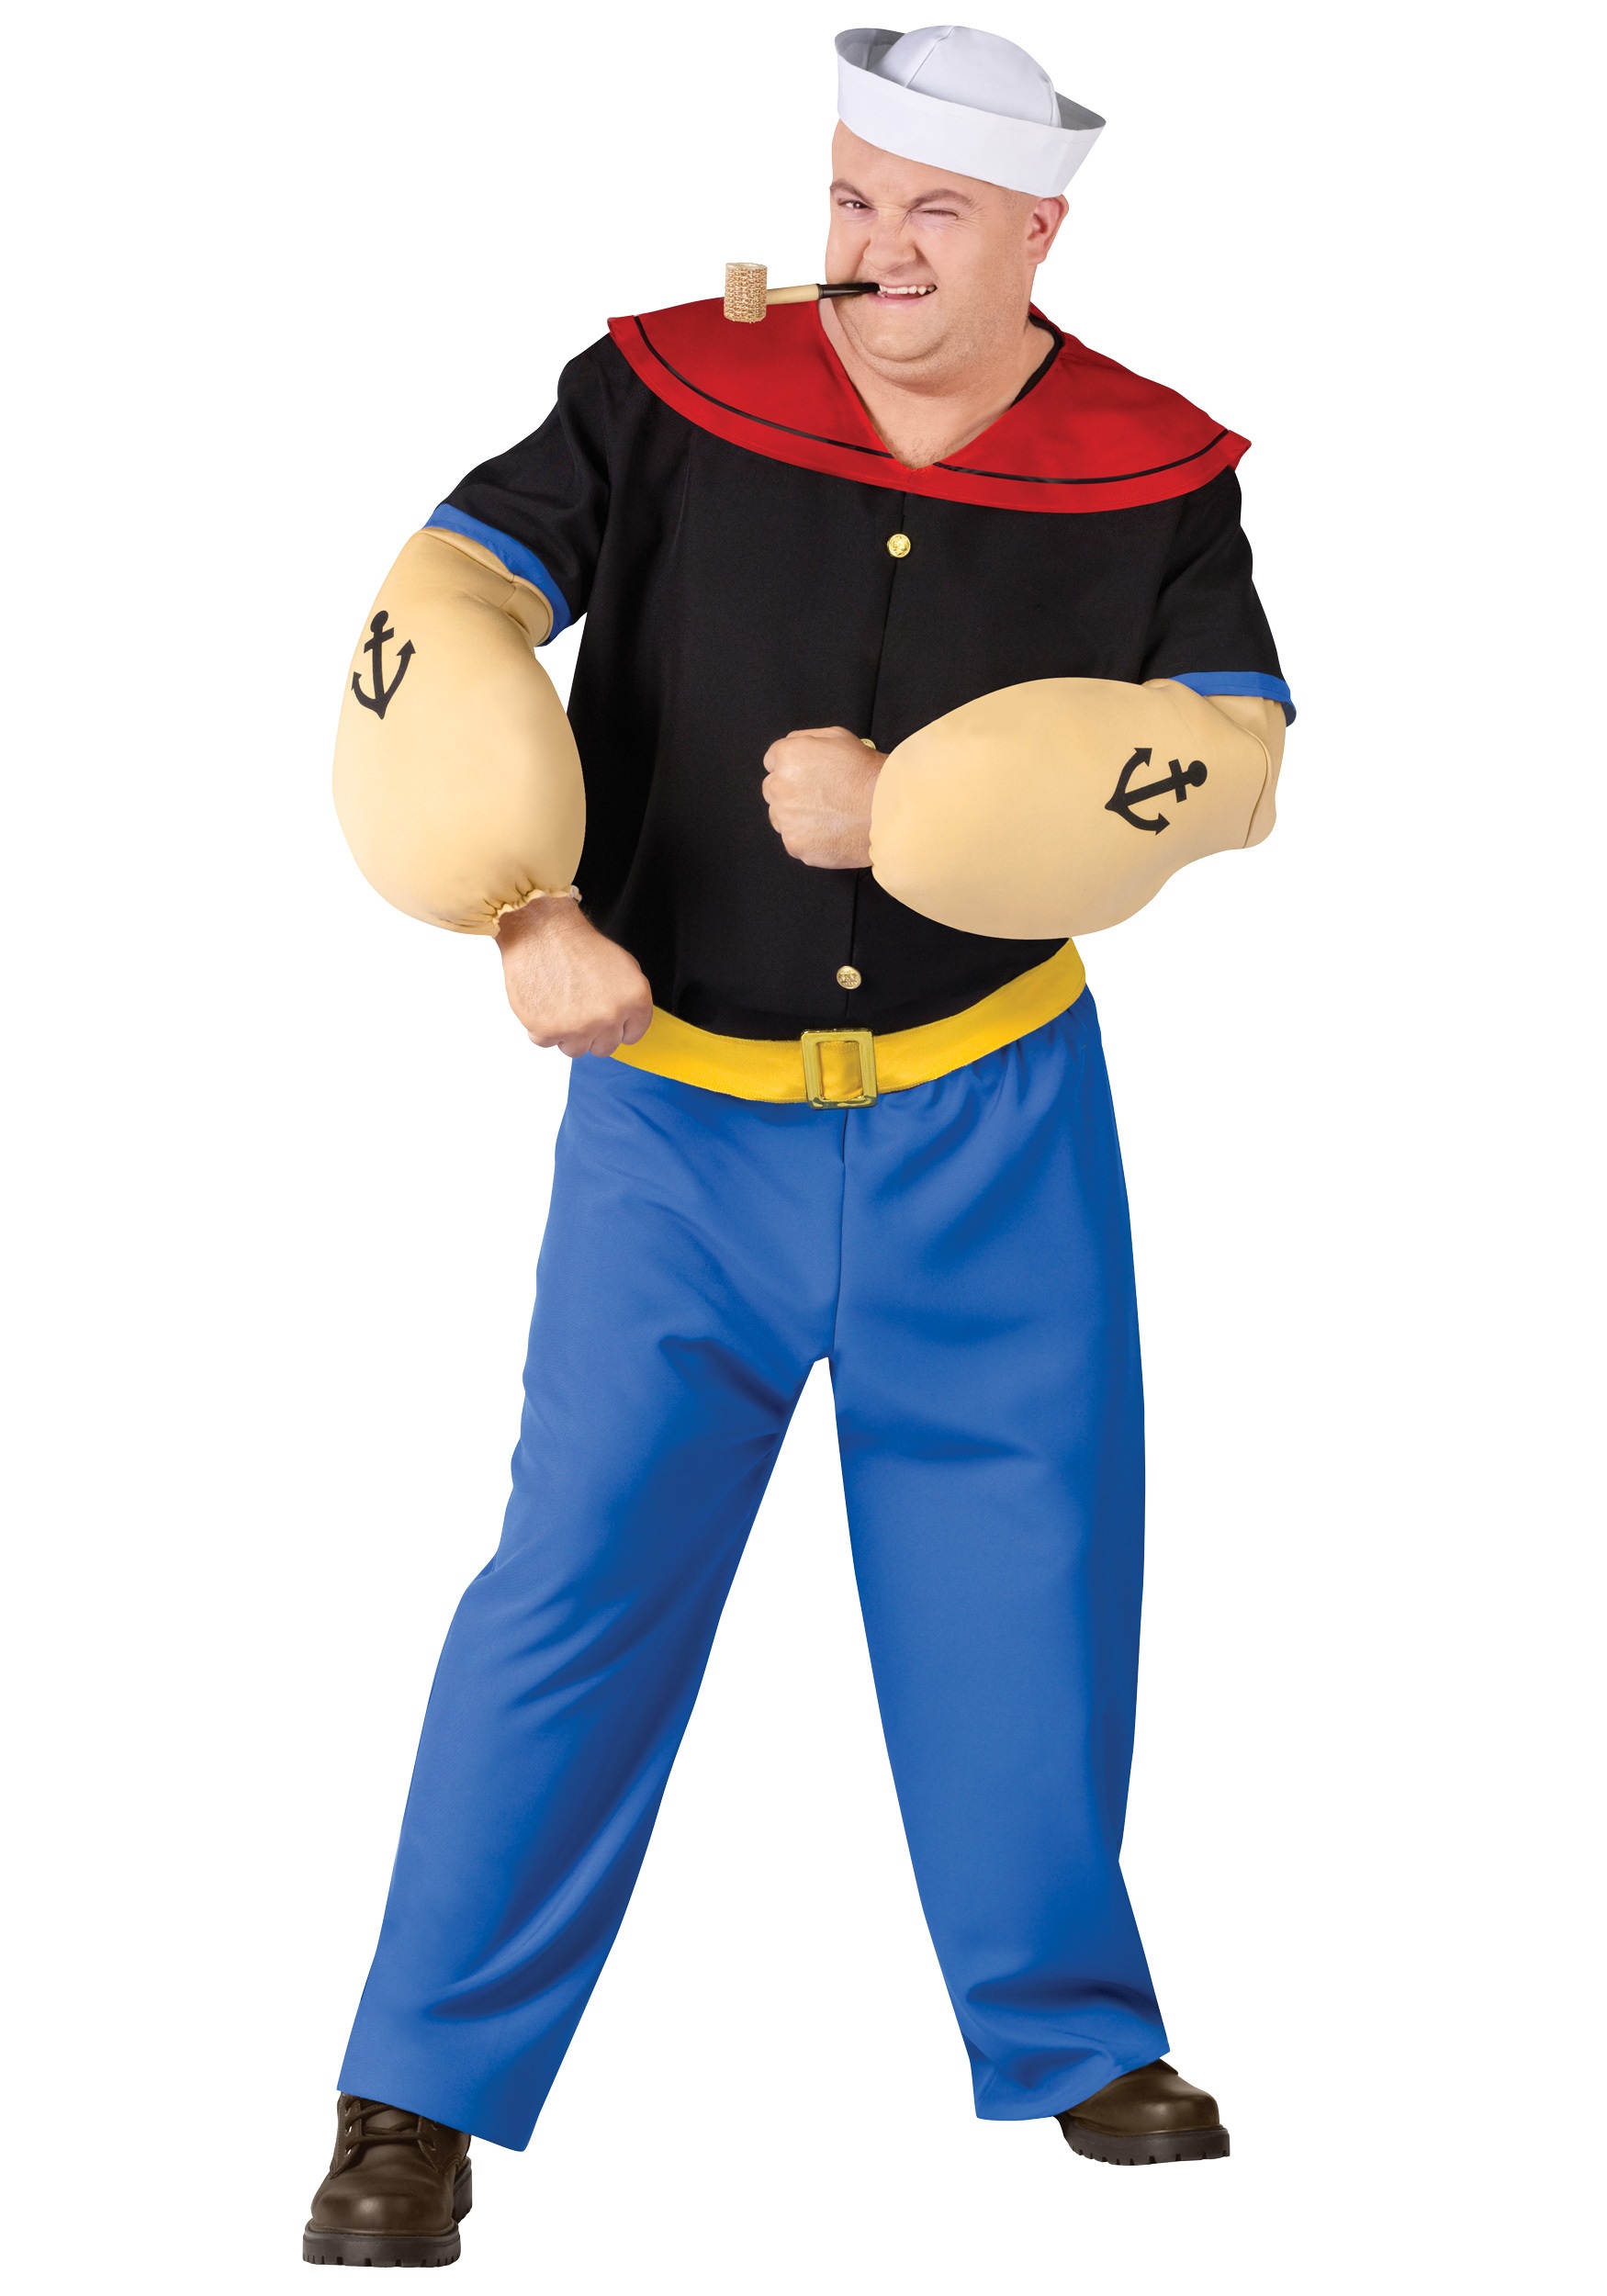 Popeye the Sailor Man Plus Size Costume for Men